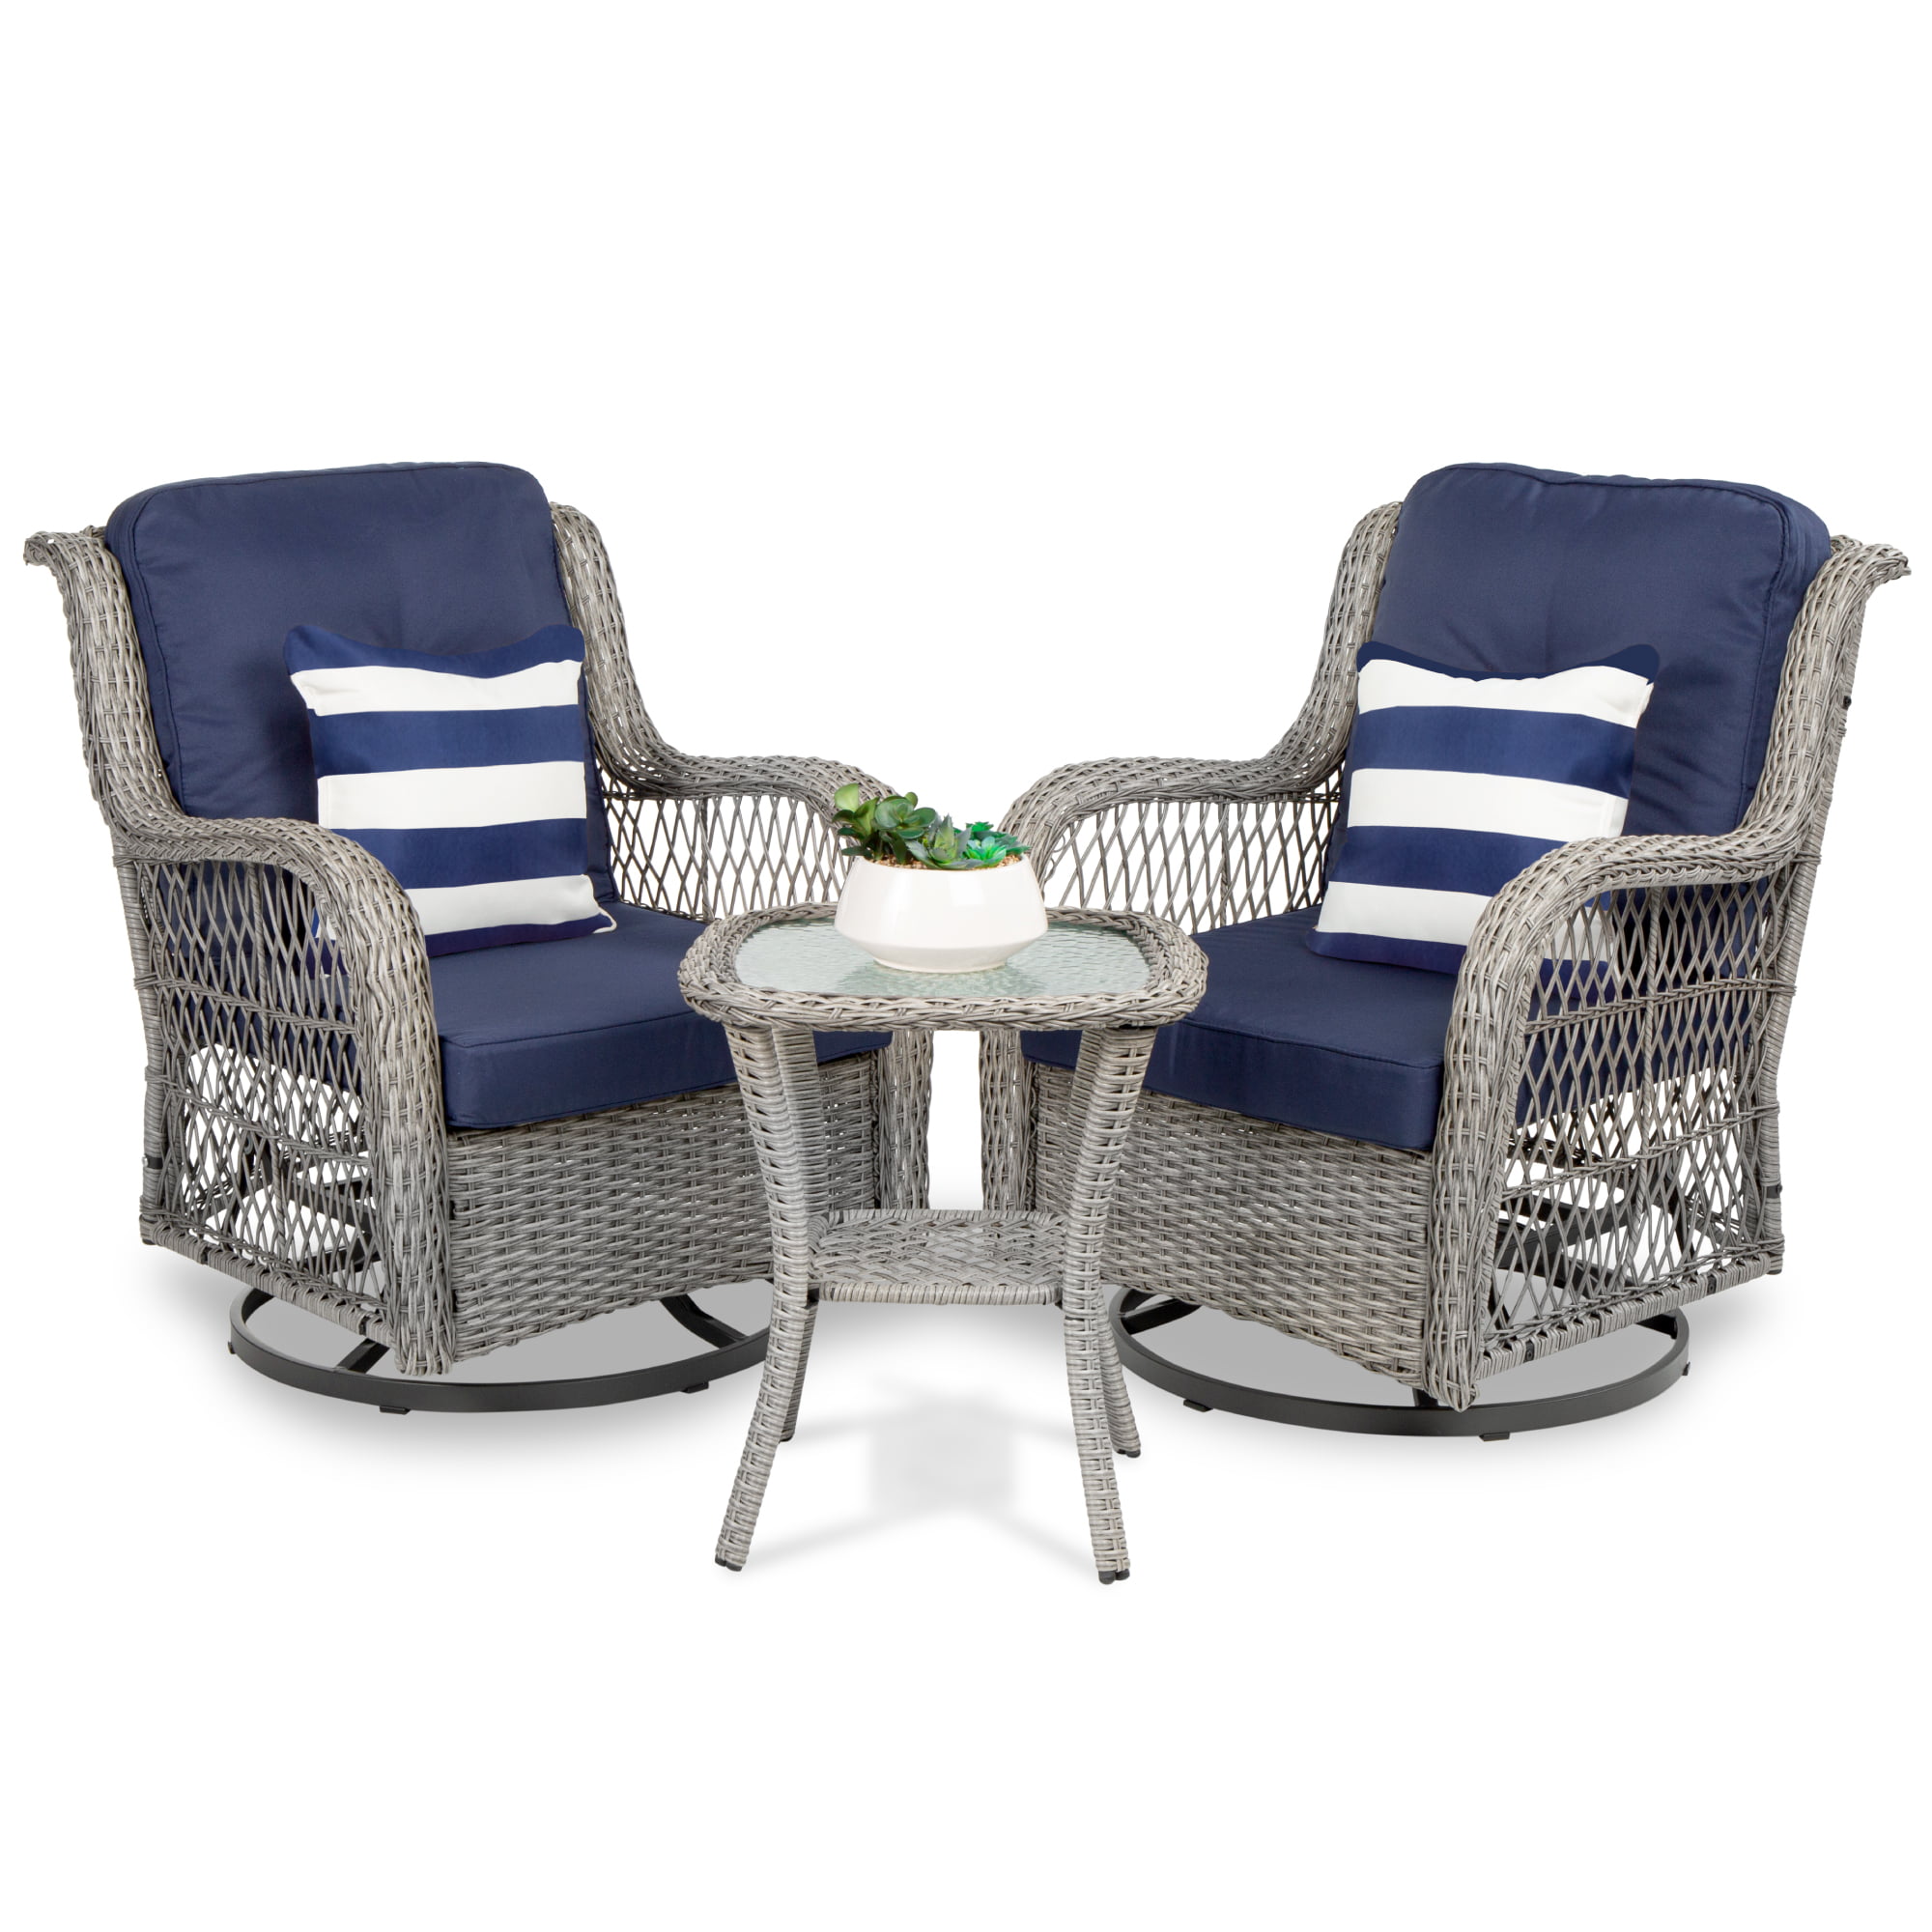 Chairs and Glass Top Side Table Gray Barton 3-Piece Outdoor All-Weather Wicker Conversation Bistro Furniture Set w/ 2 